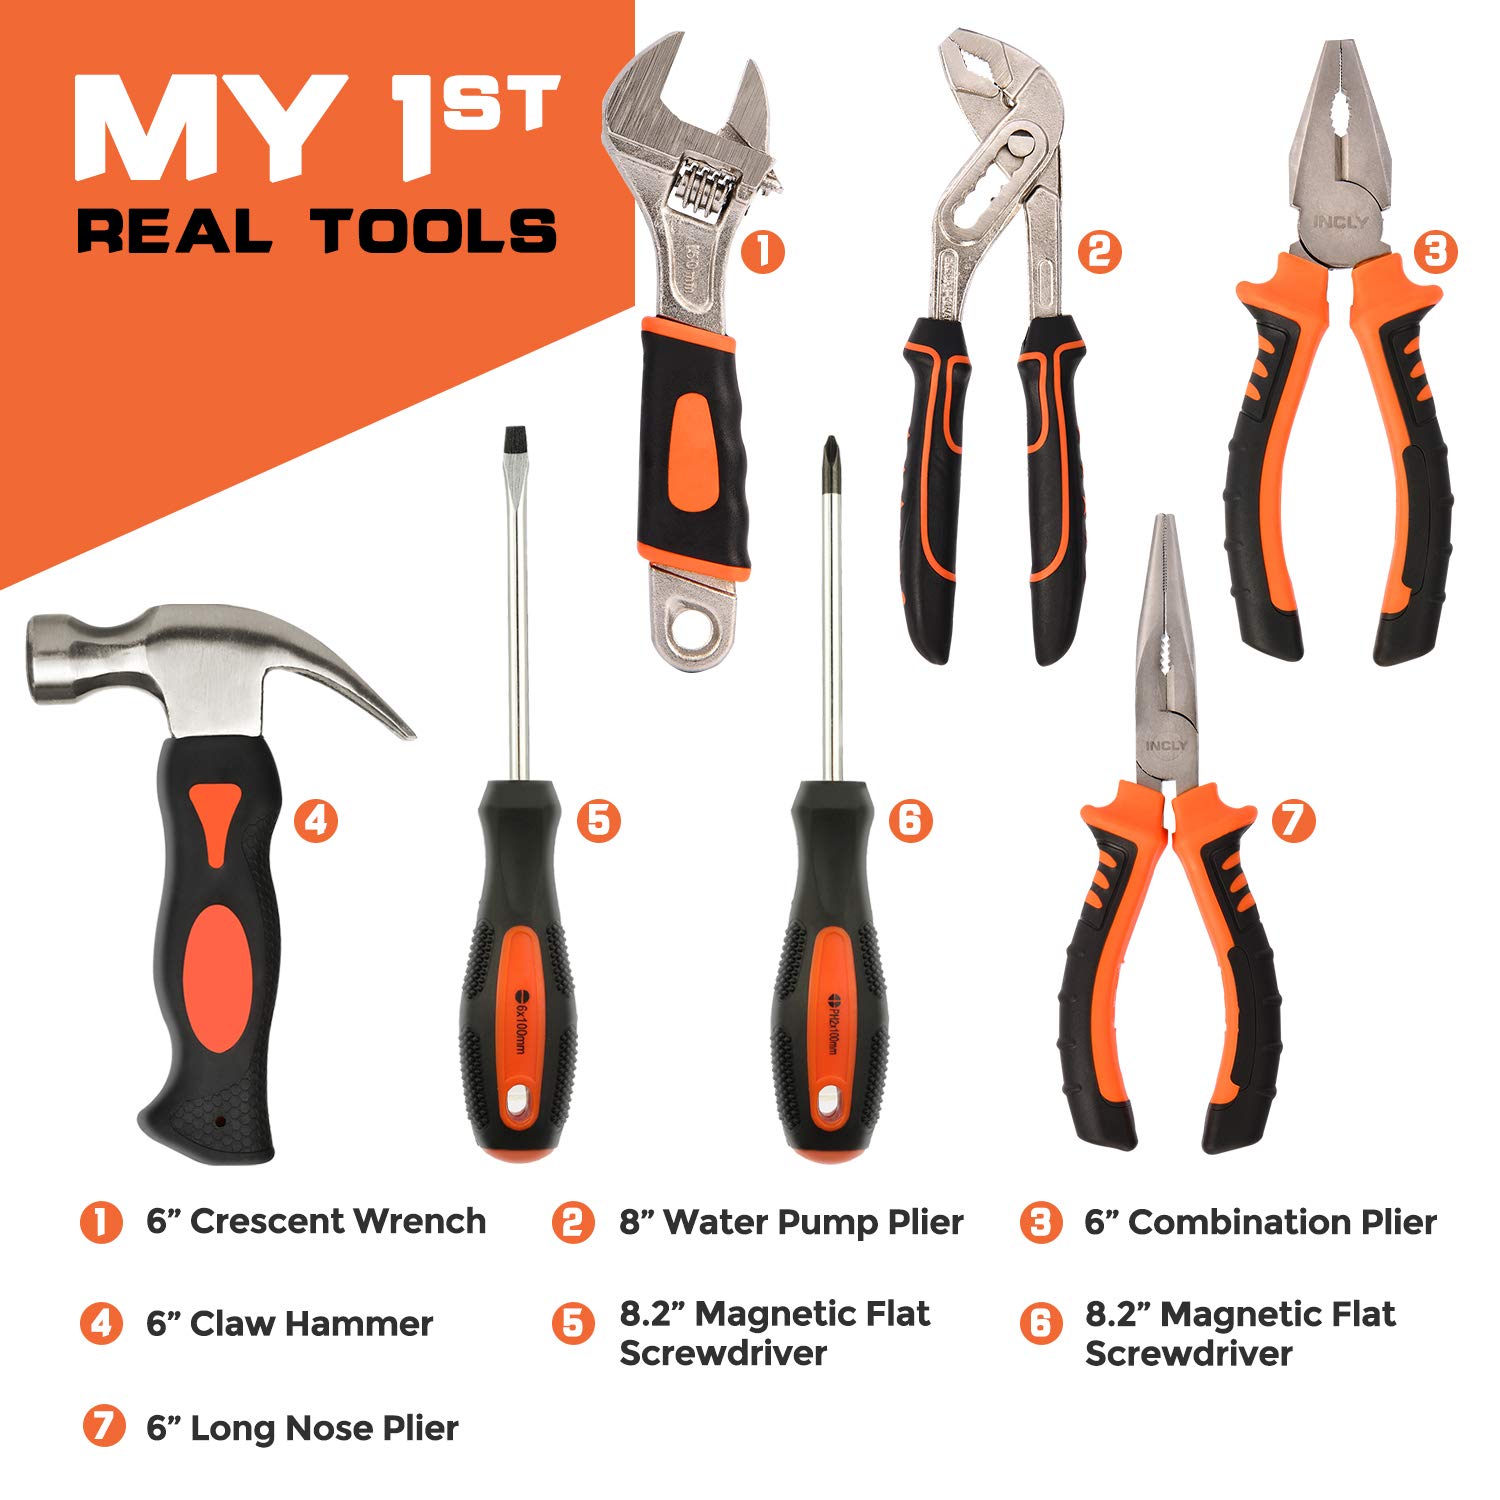 INCLY 95 PCS Kids Real Tool Set, Boys Small Real Hand Tools Kit, Children Construction Learning Tools Hammer Screwdriver for Home DIY Building and Woodworking,Come with Tool Belt & Bag